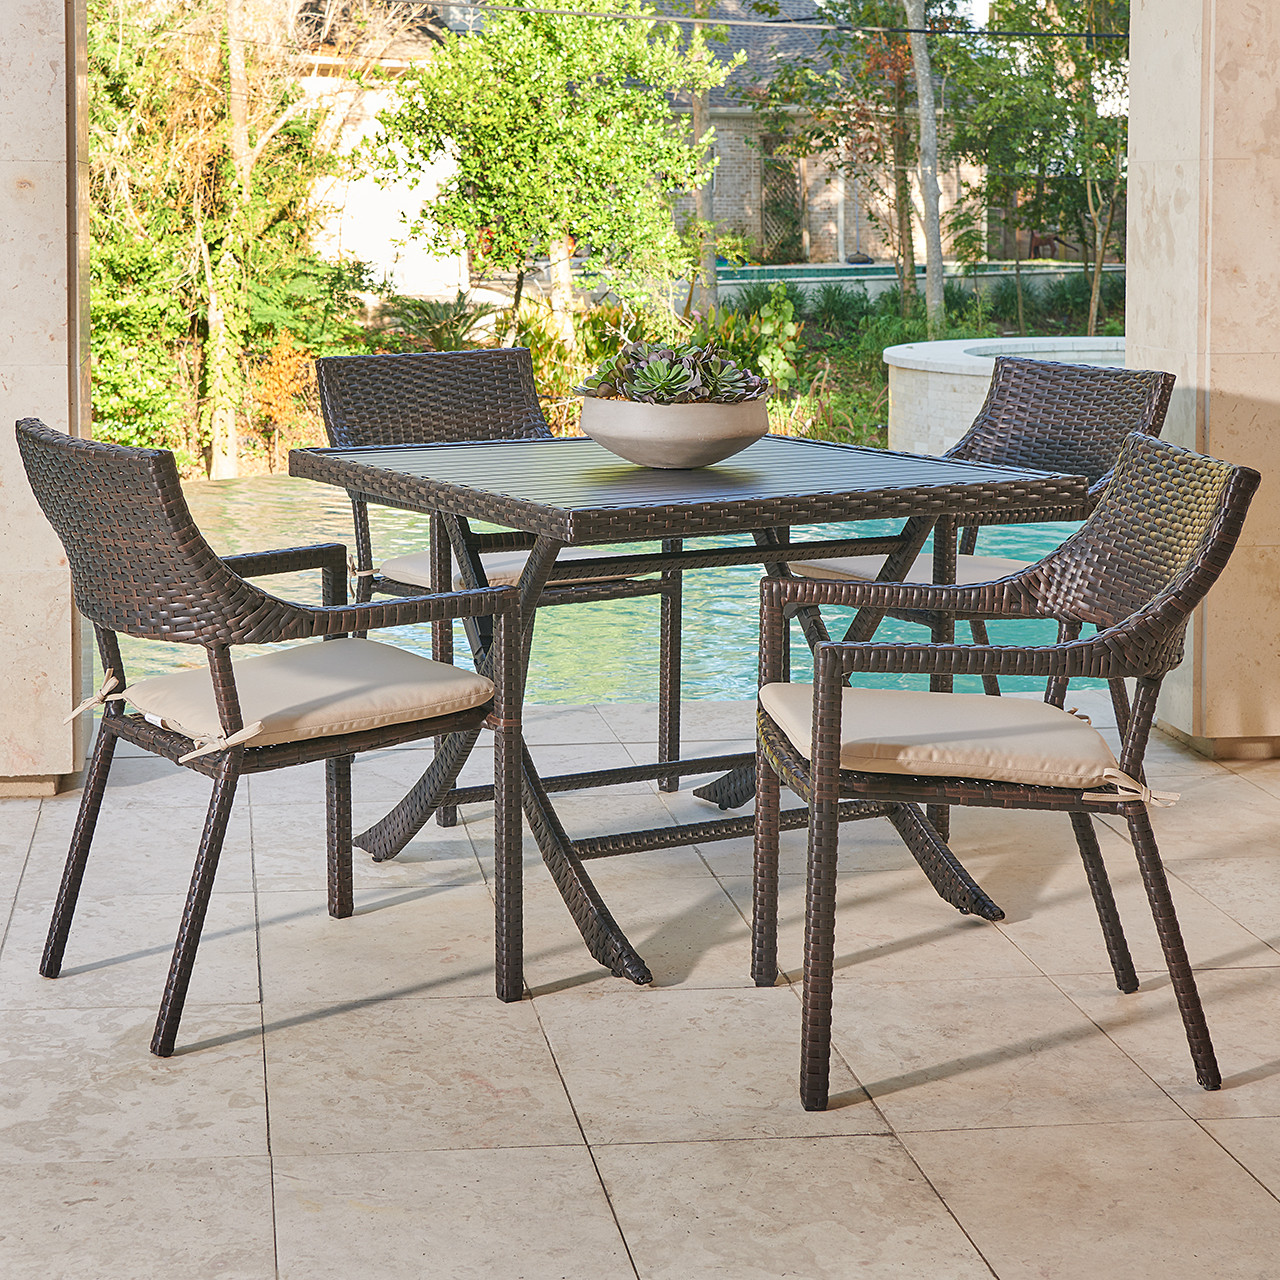 Terrace Dark Elm Outdoor Wicker with Cushions 5 Pc. Dining Set + 41 in. Sq. Table